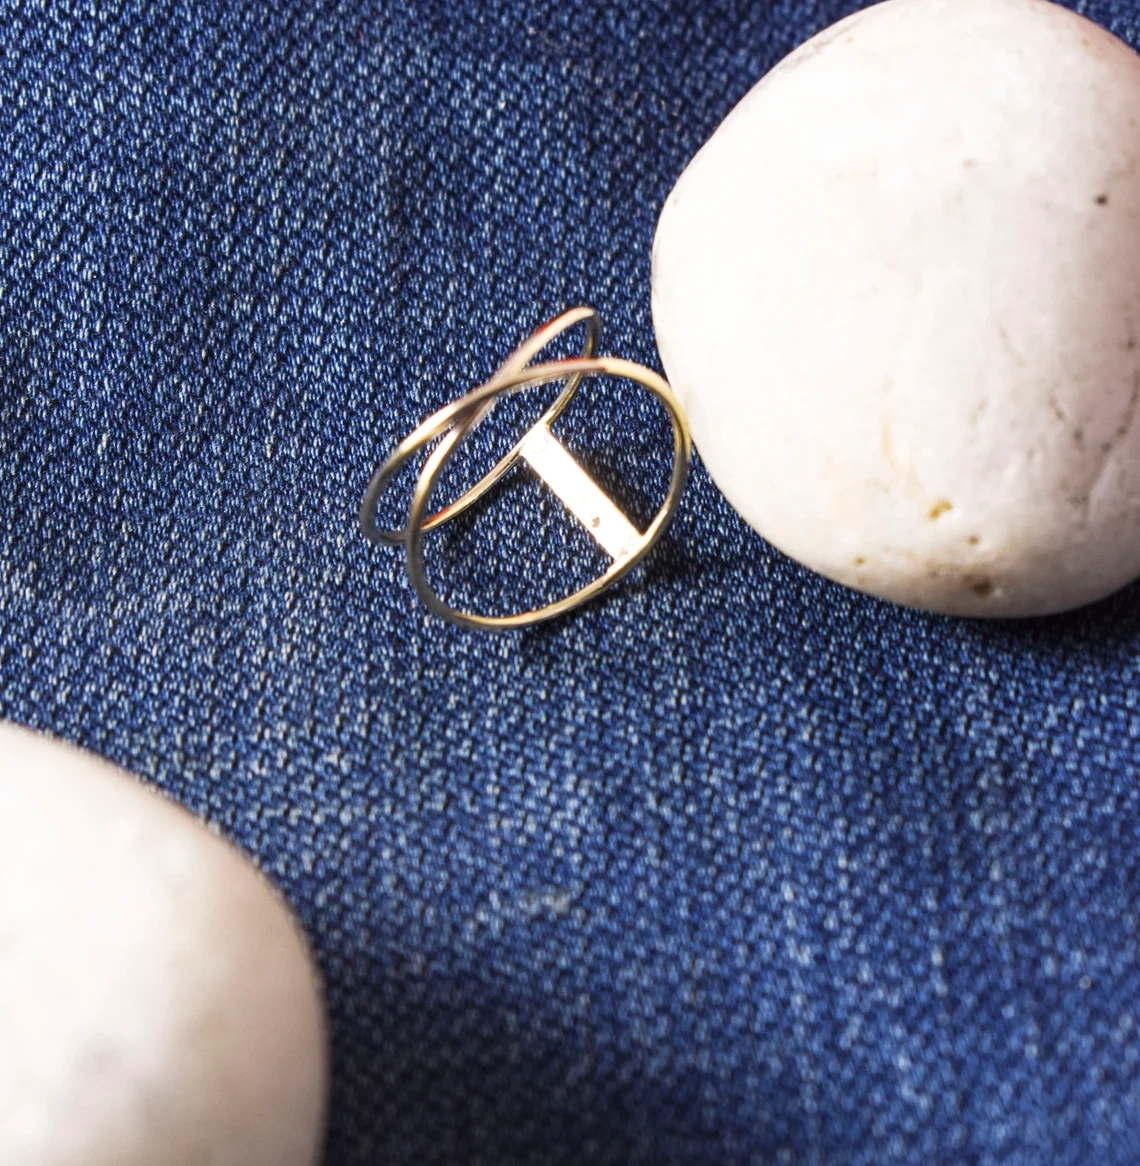 14K Solid Gold Split Shank Wire Ring Stacking Dainty Minimalist Handmade Ring Geometric Modern Double Band Delicate Unisex Cocktail Ring-11403206